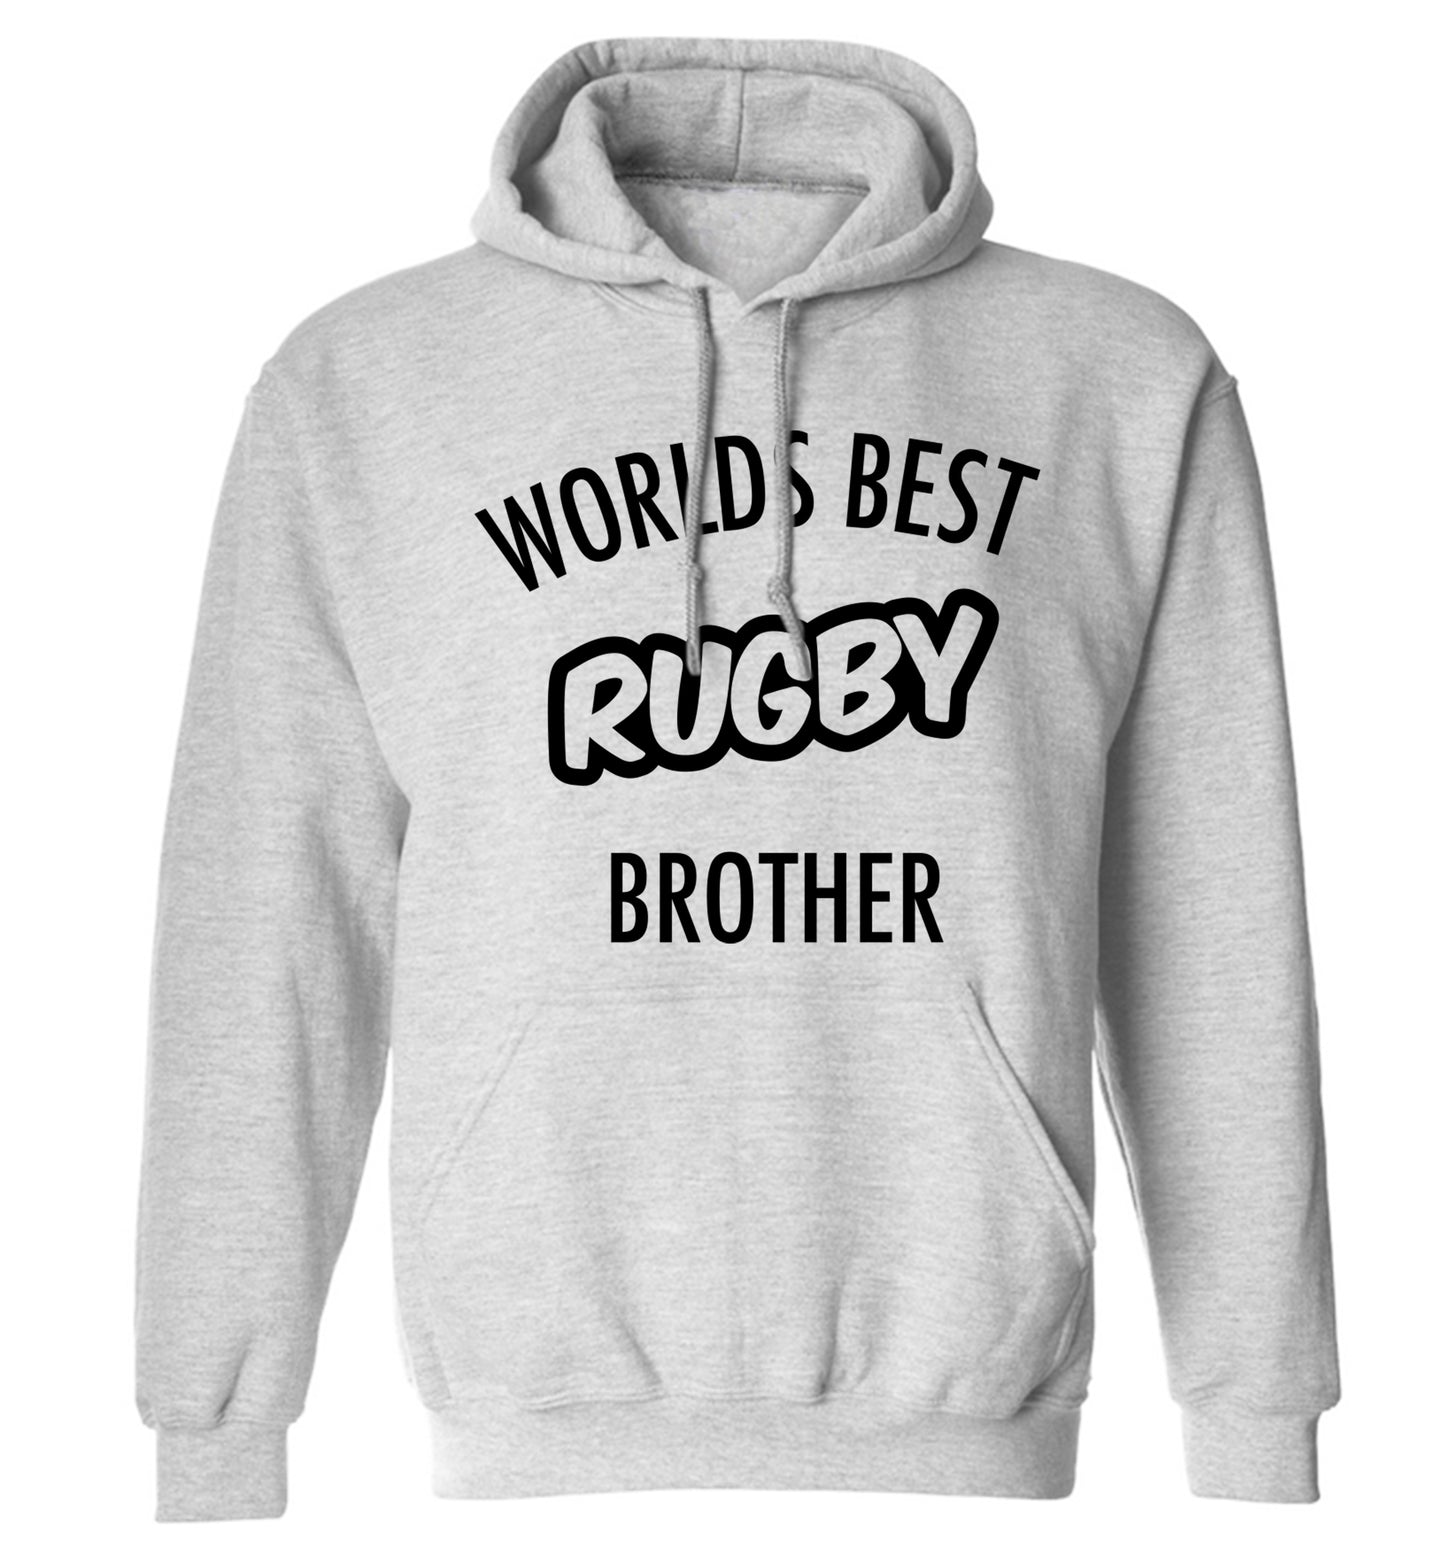 Worlds best rugby brother adults unisex grey hoodie 2XL